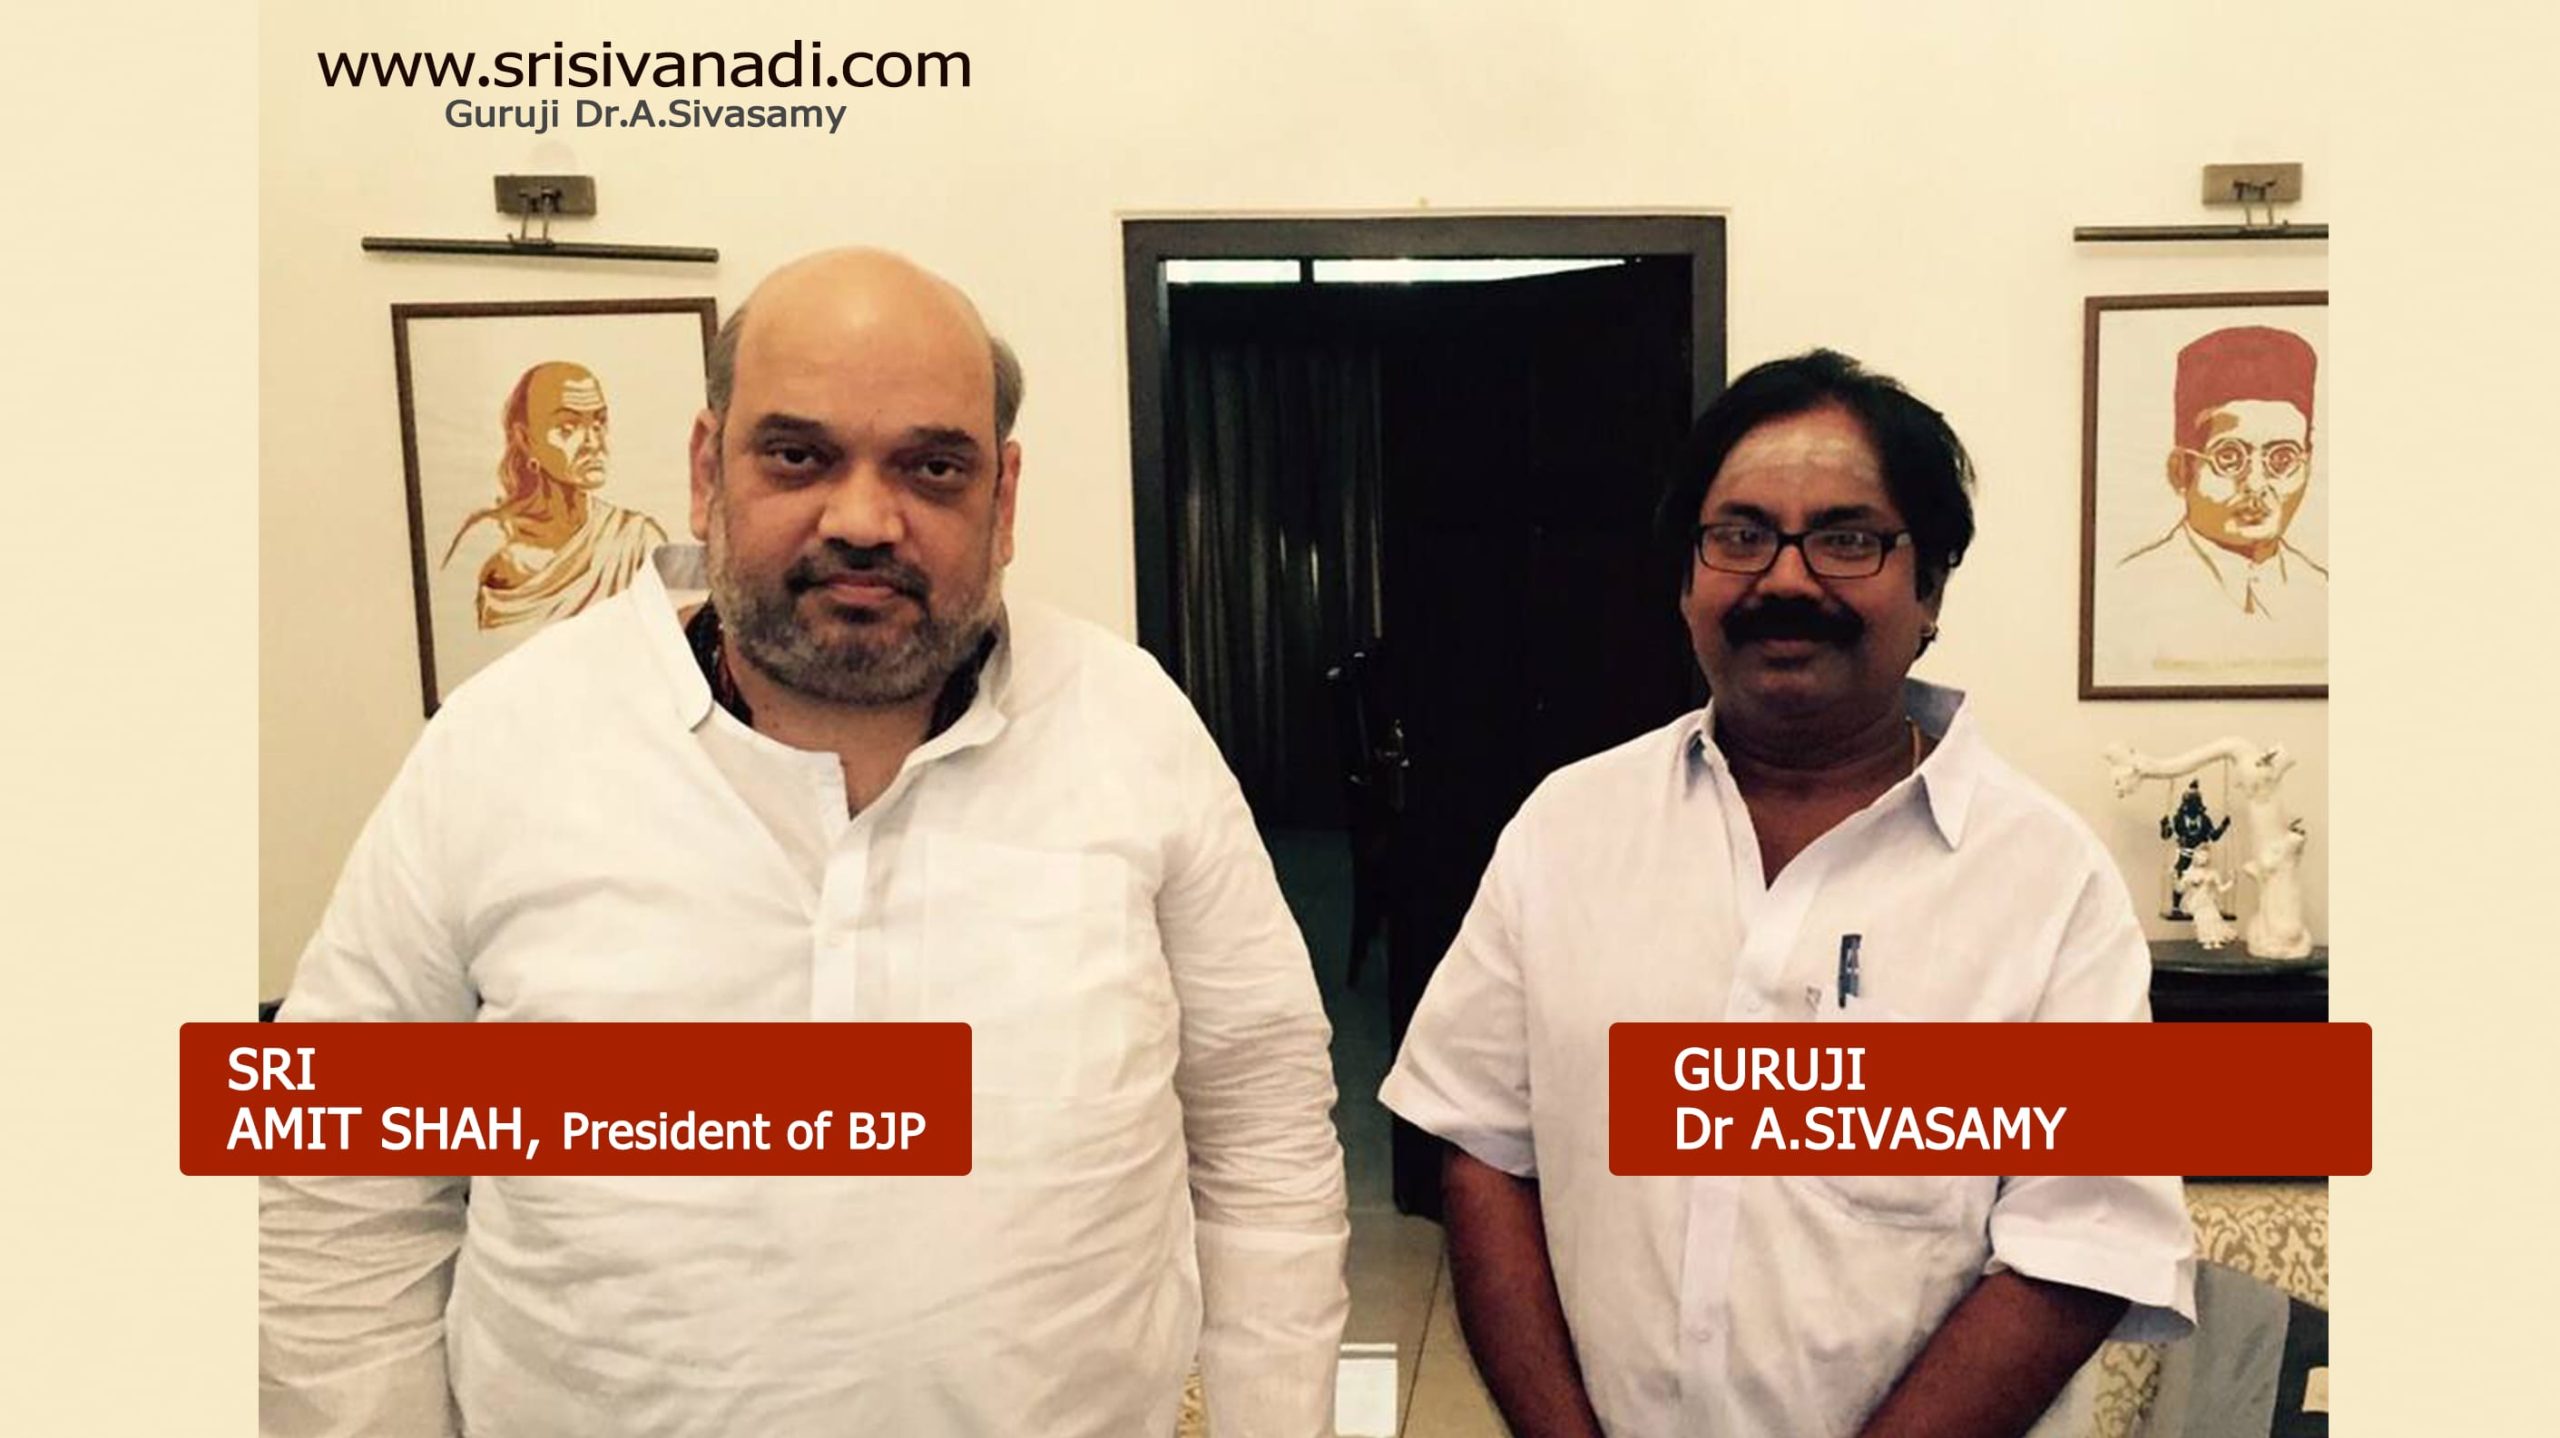 One of our Esteemed Clients, Honourable Sri Amit Shah, President of BJP